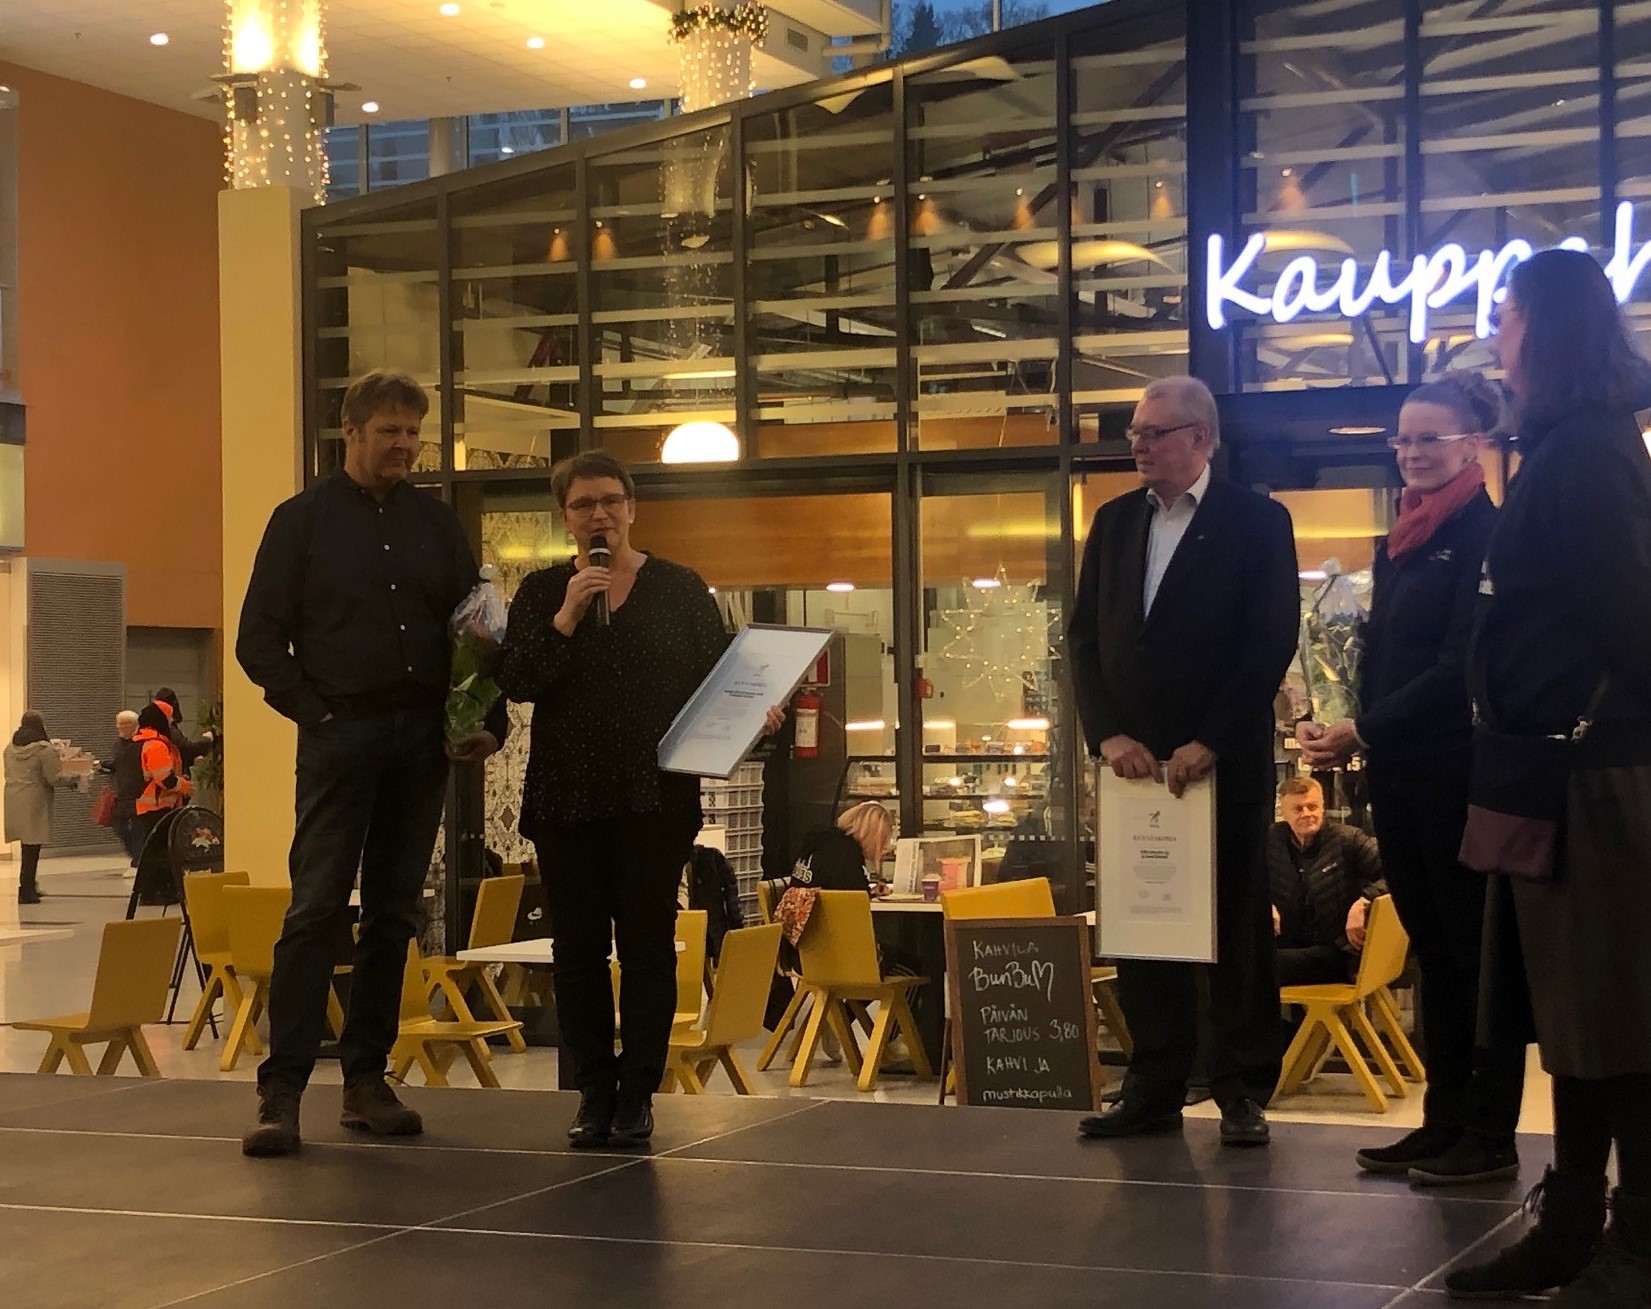 Putkisalo Kartano received the South Savo Best Award in recognition of its responsible, high-quality and ethical meat production.